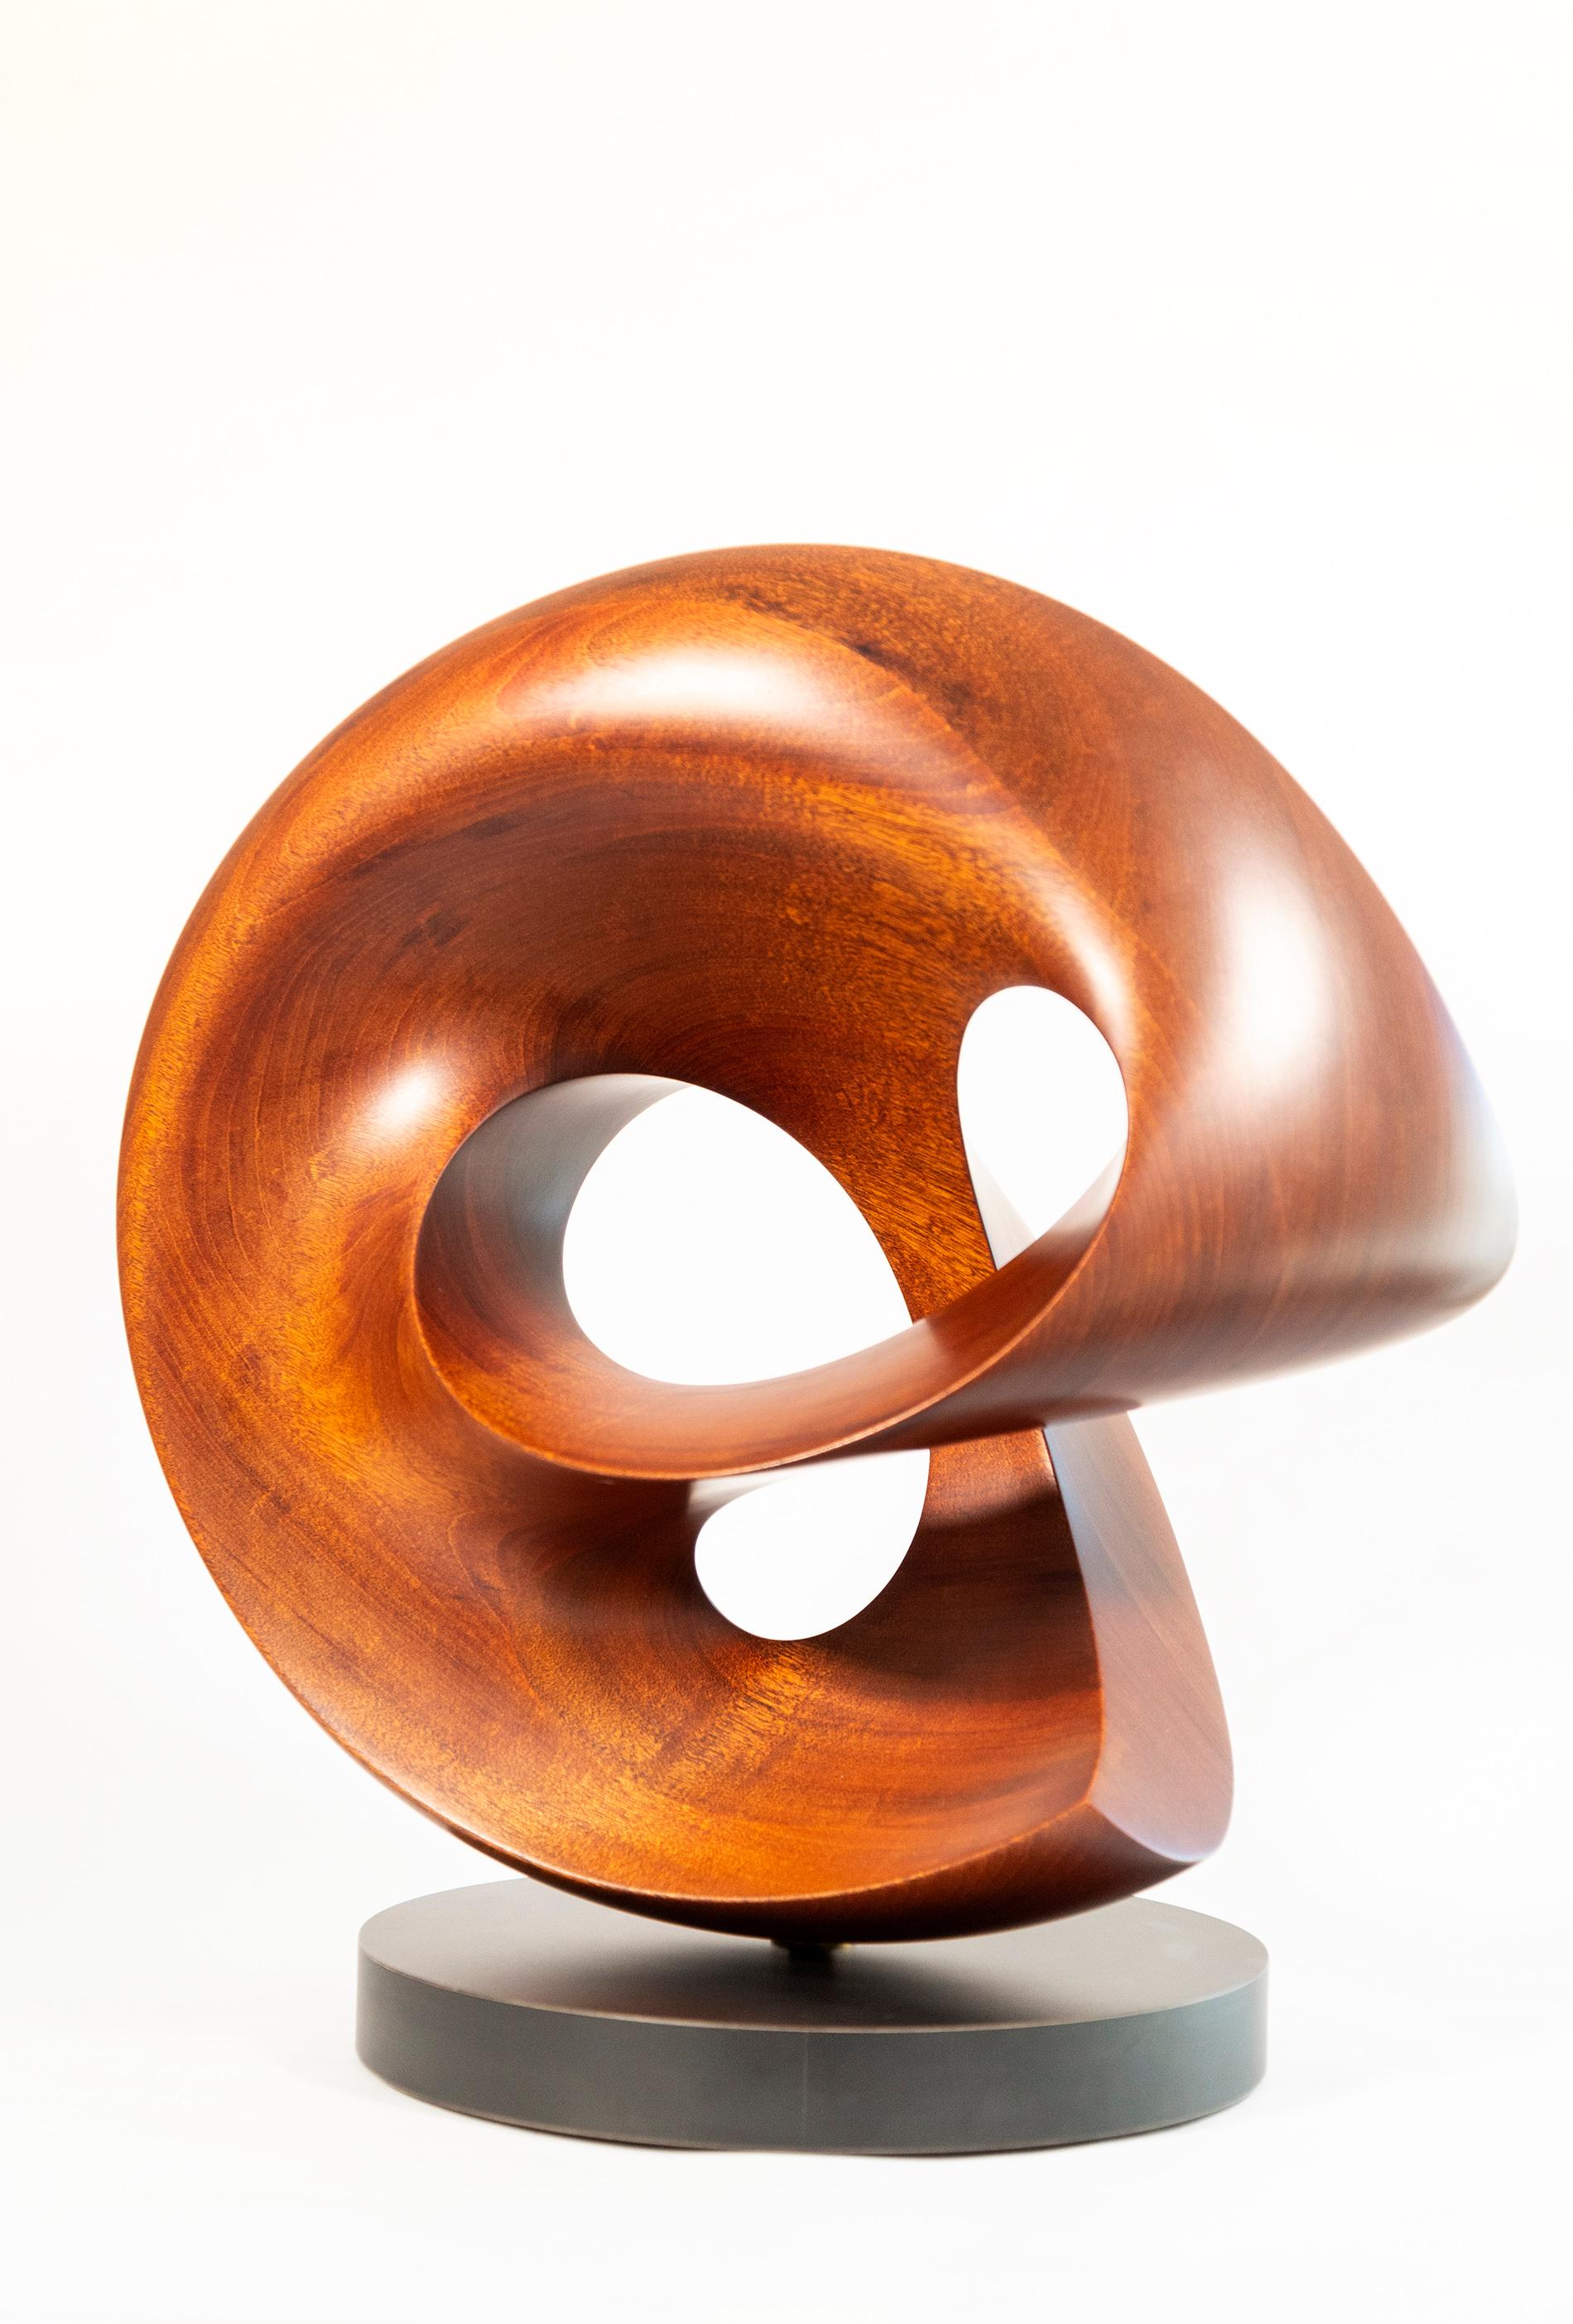 Fanfare - smooth, polished, abstract, contemporary, mahogany carved sculpture - Sculpture by David Chamberlain